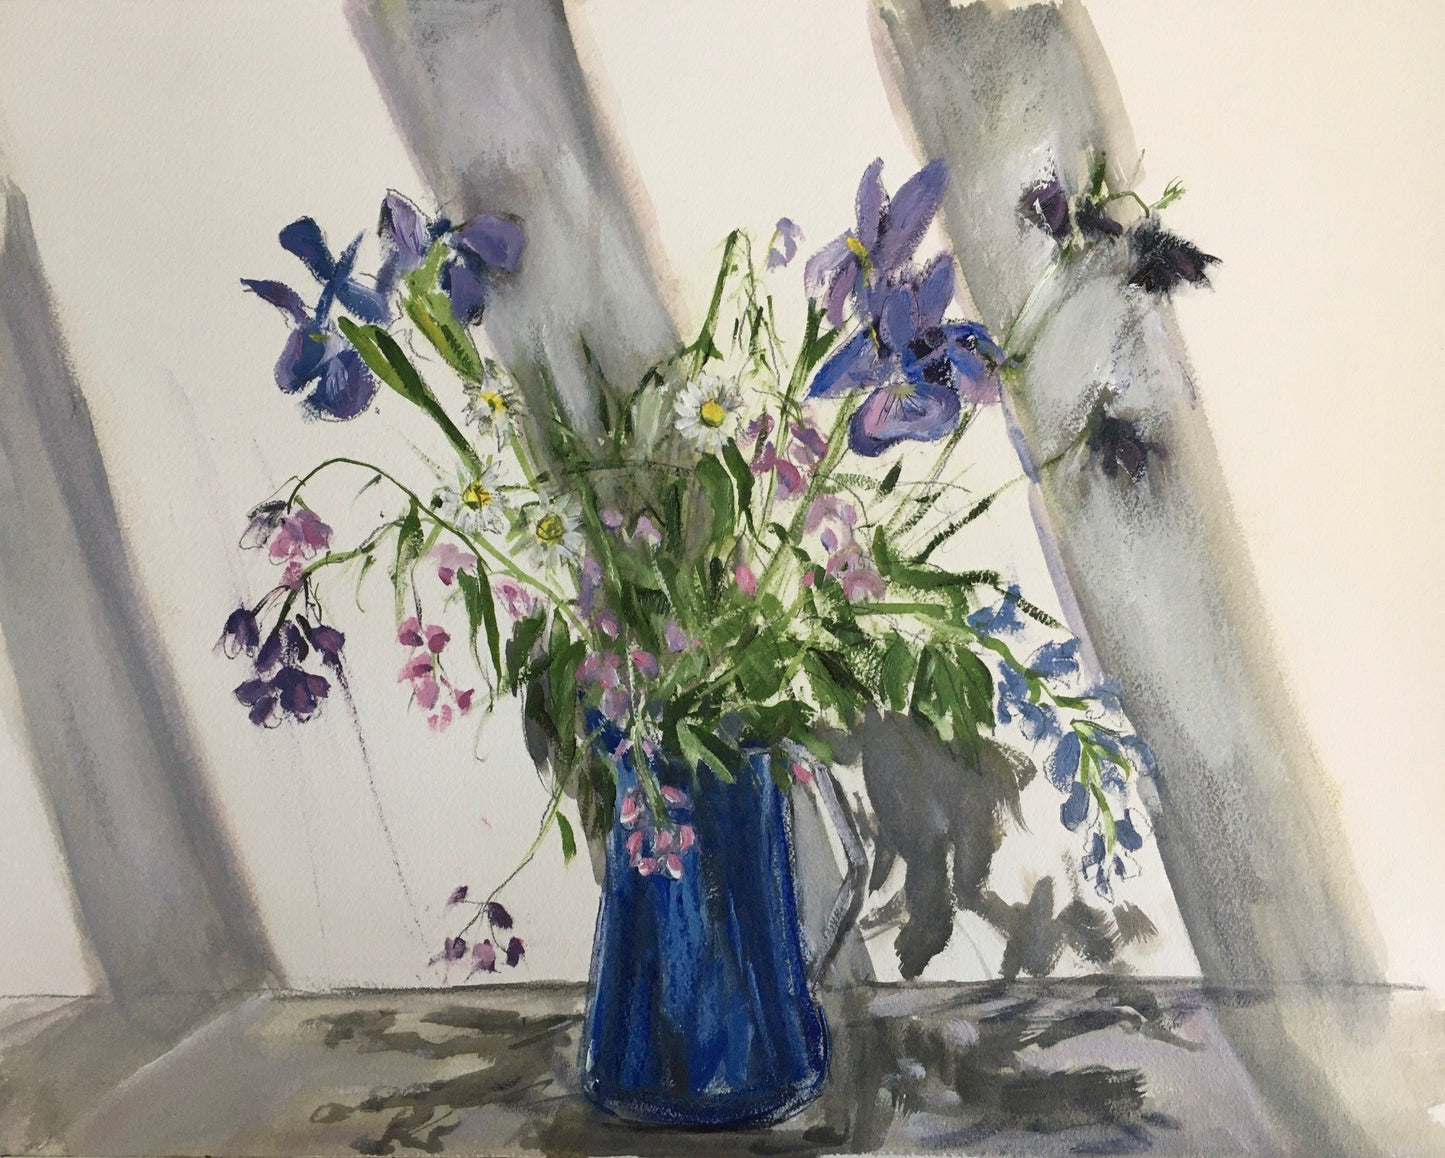 Flowers in Blue Jug, May 30th, 2021